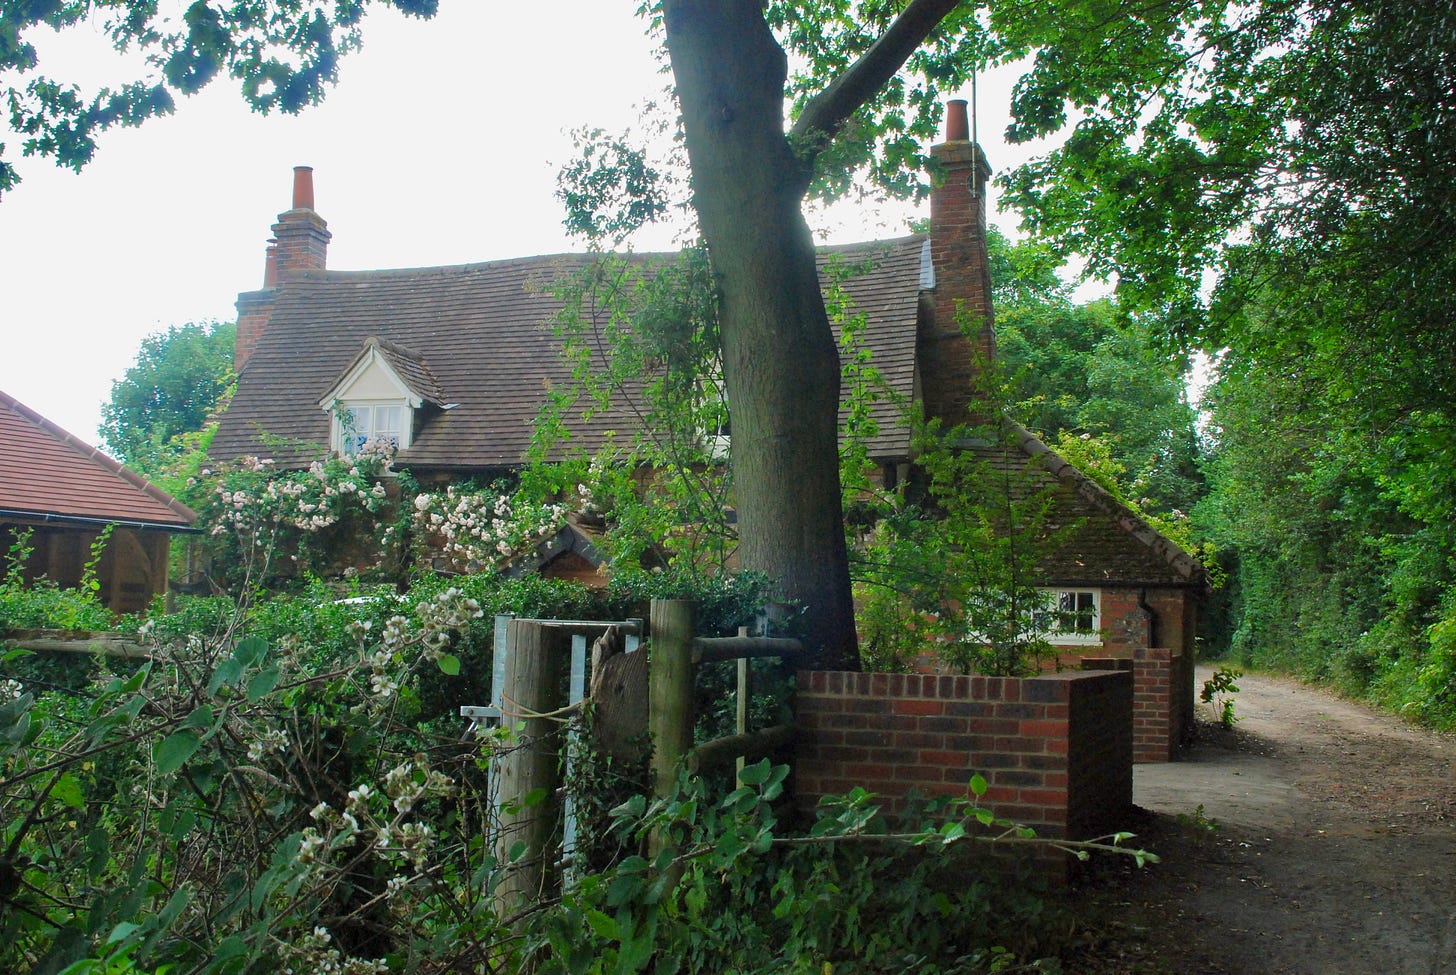 Rose Cottage from the far end of Dog Lane, near the fields. This view of the home is captured on the front of Goudge’s novel, The White Witch, as the cottage inspired the story. 